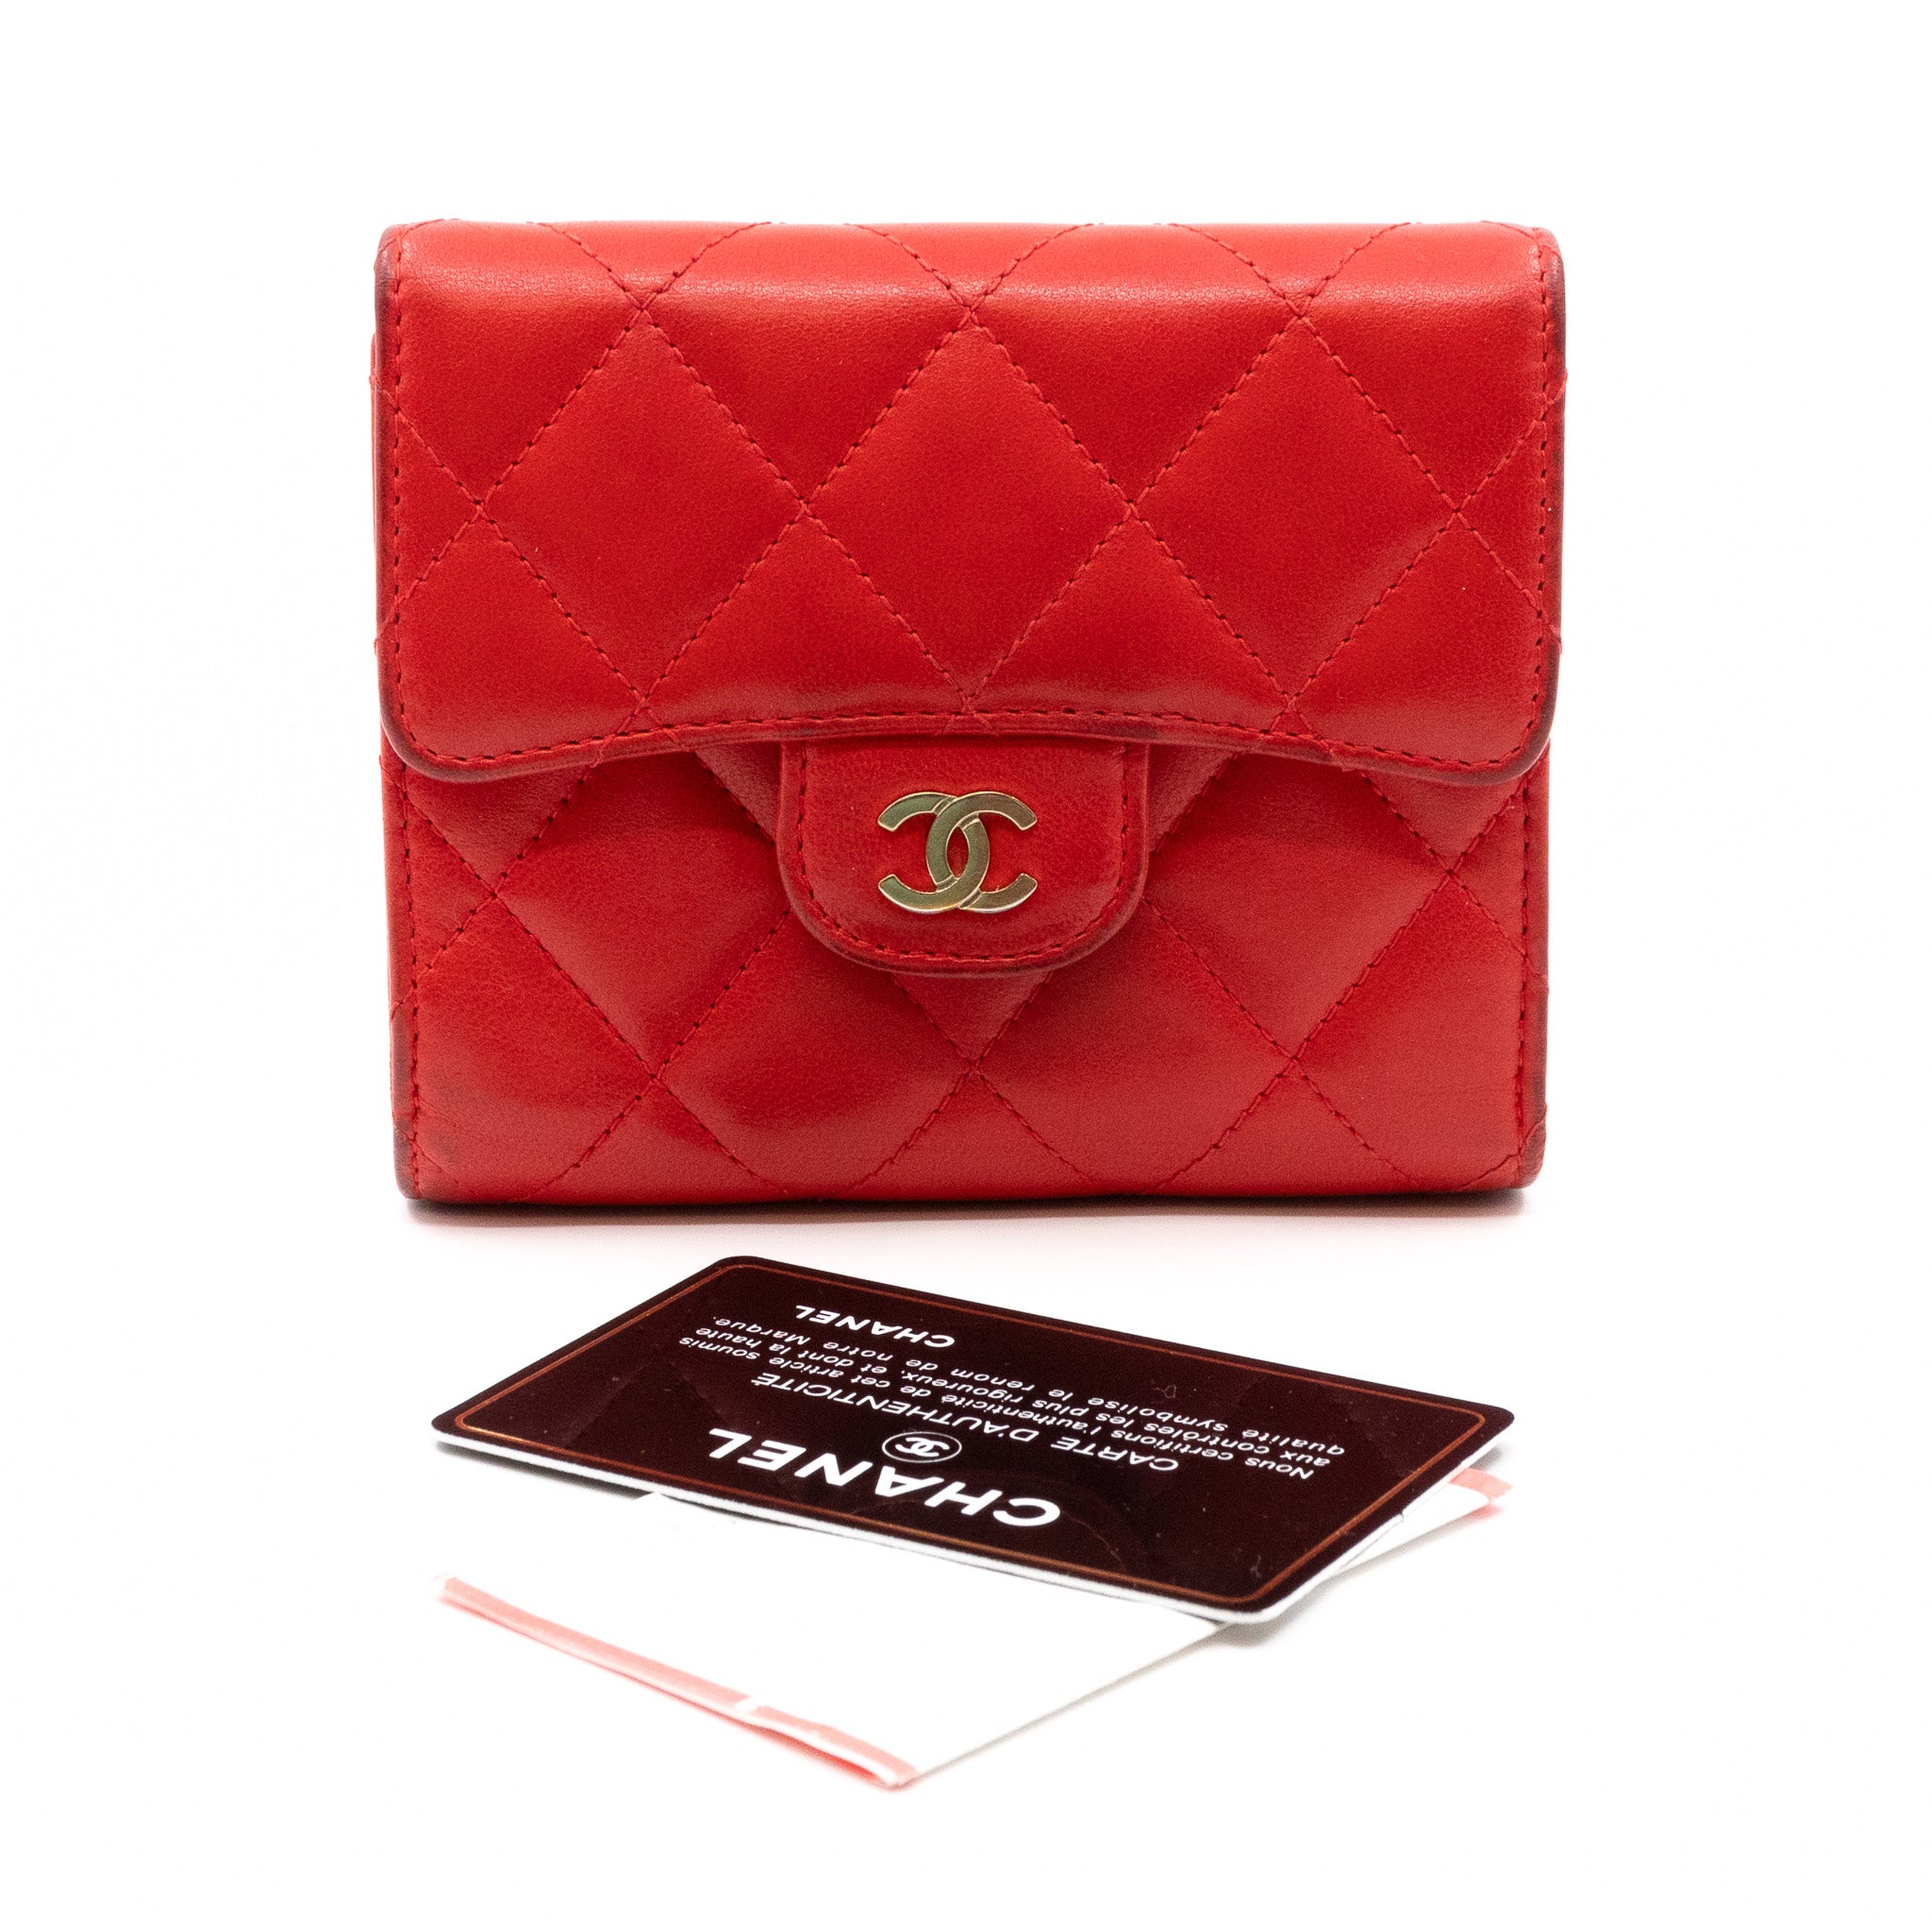 Chanel Mini Leather Accessories For Cruise 2016 Collection